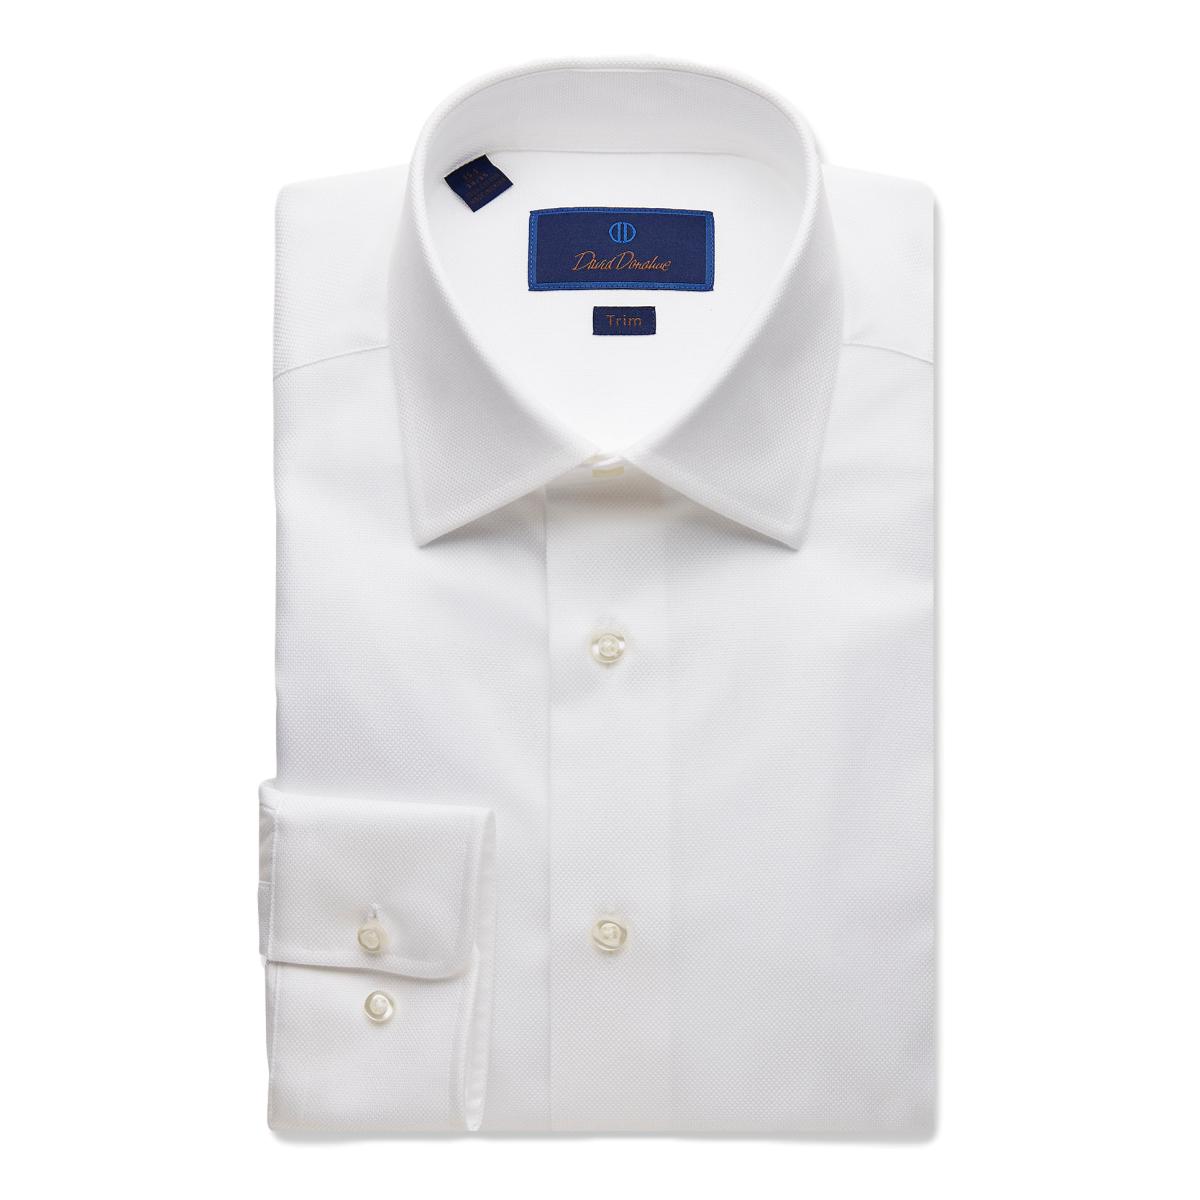 All Cotton Oxford Weave Shirt - Family Britches